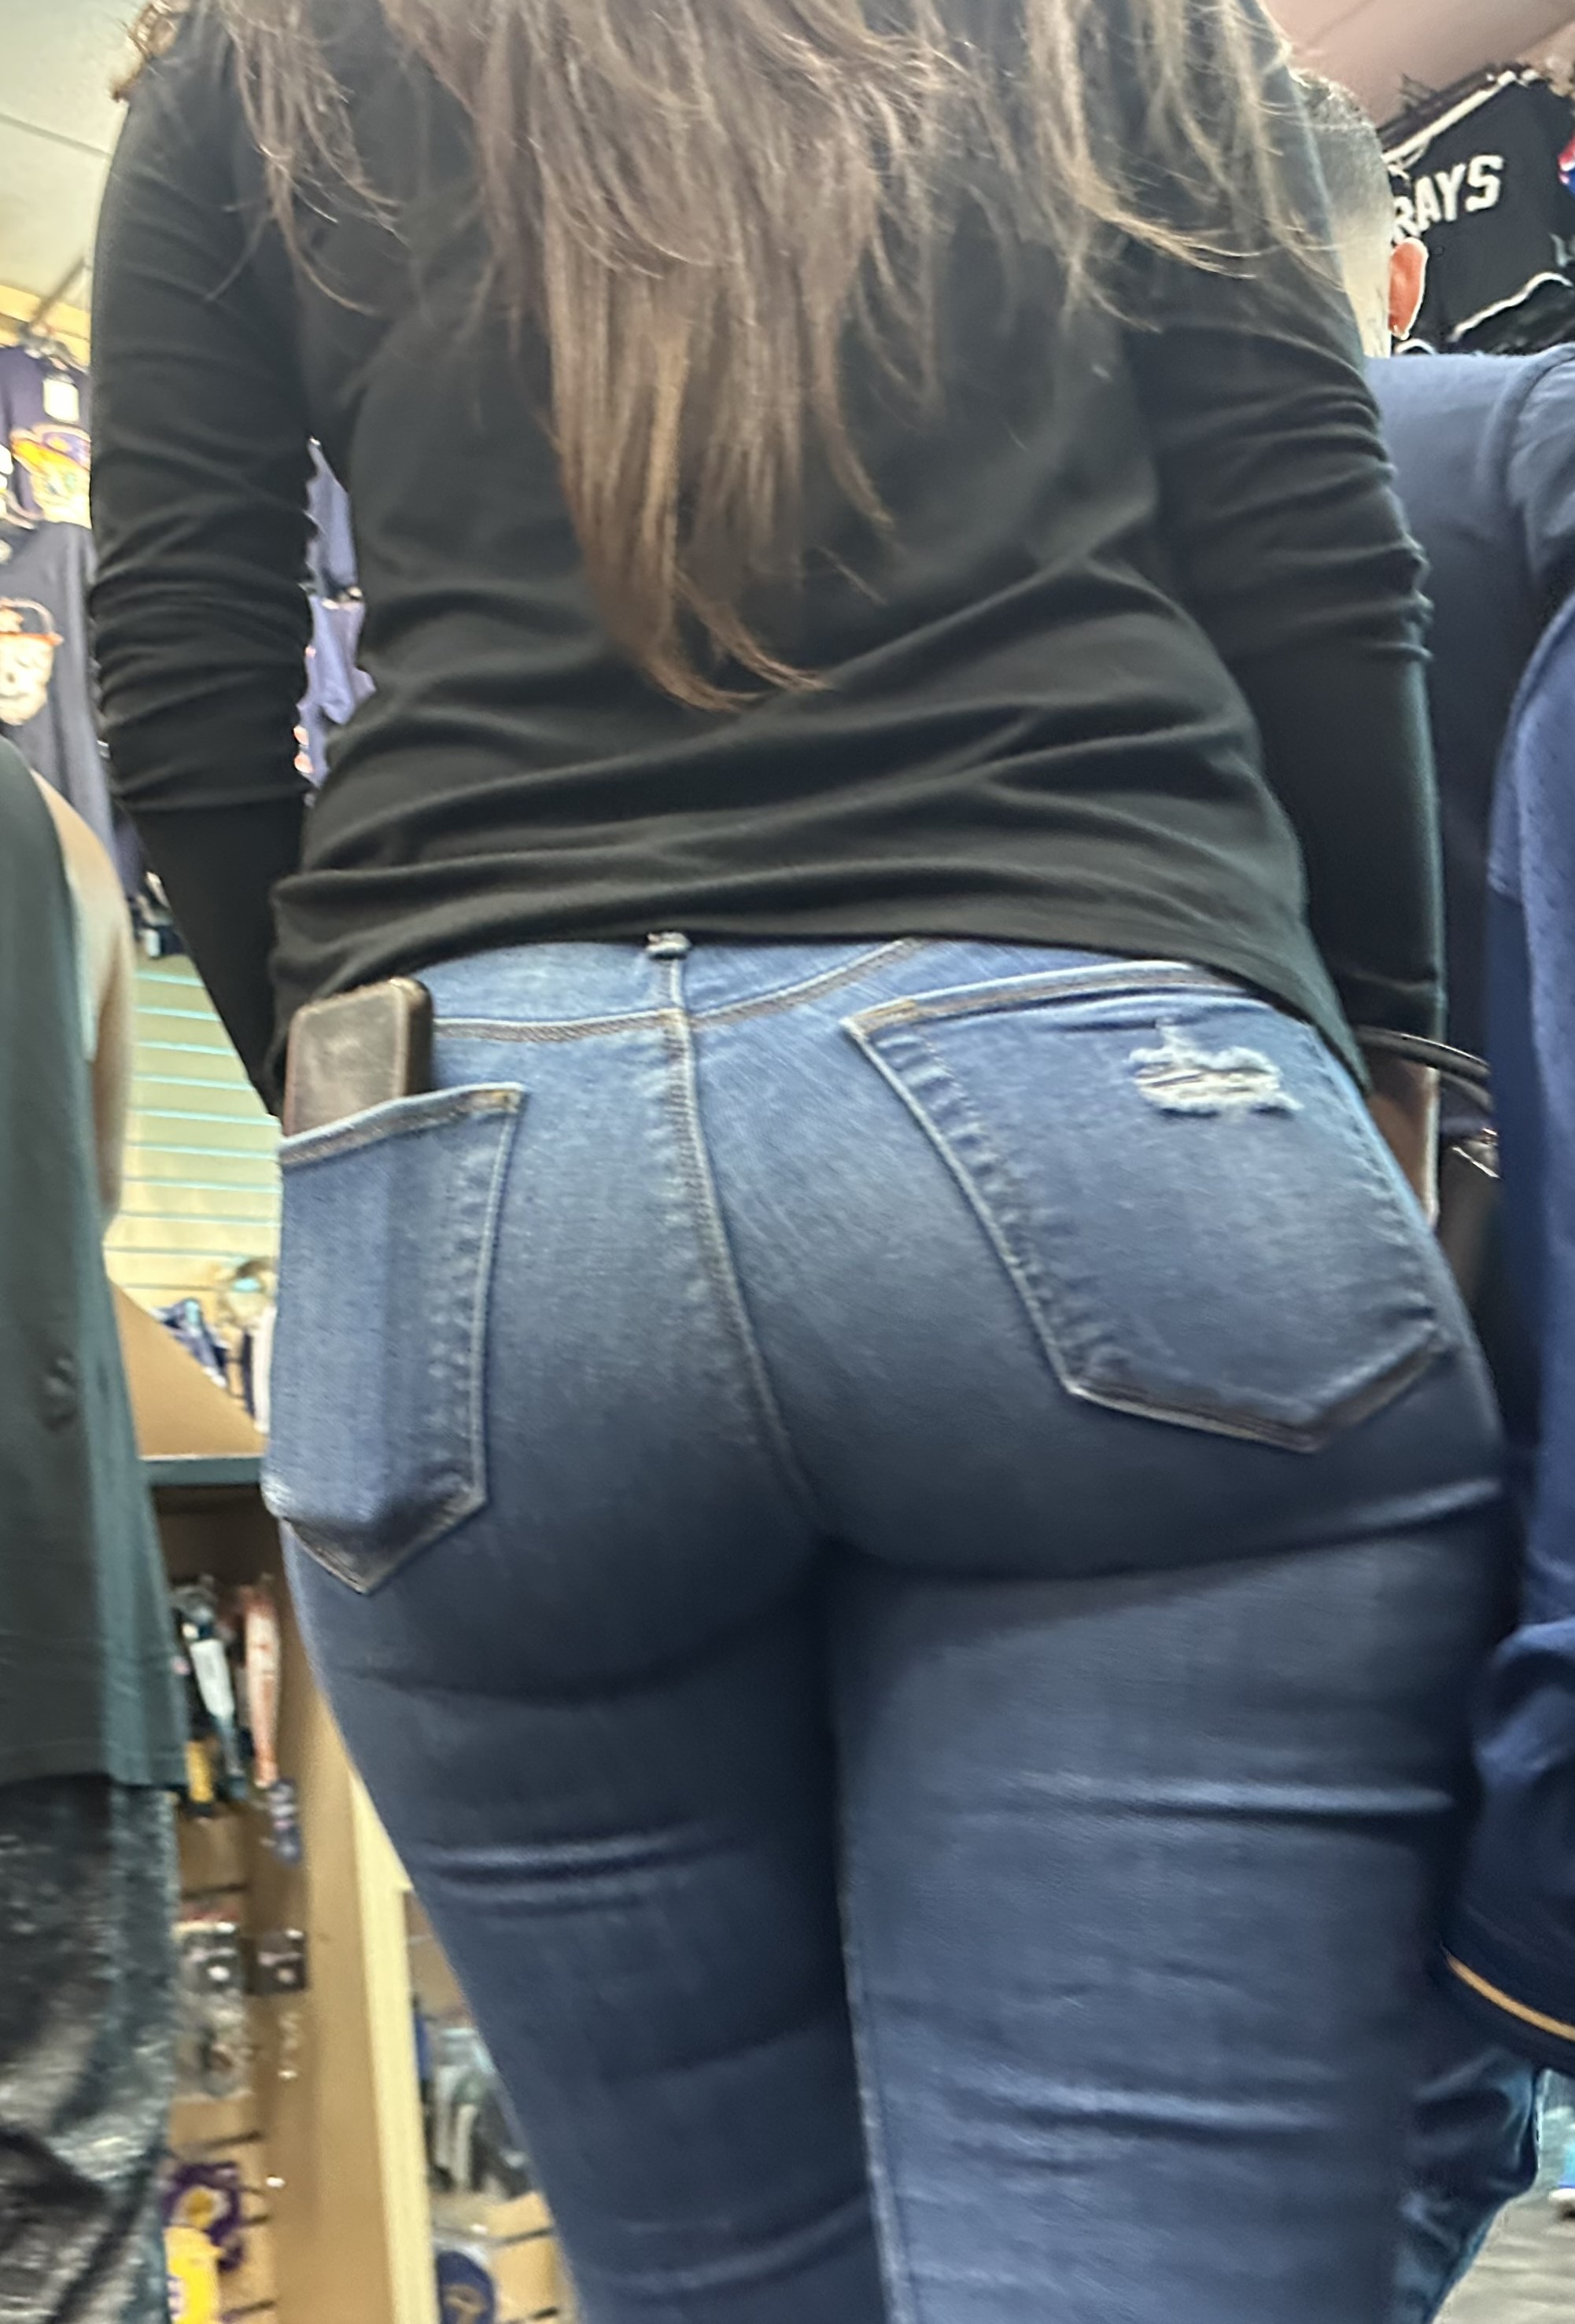 Nice asses in jeans